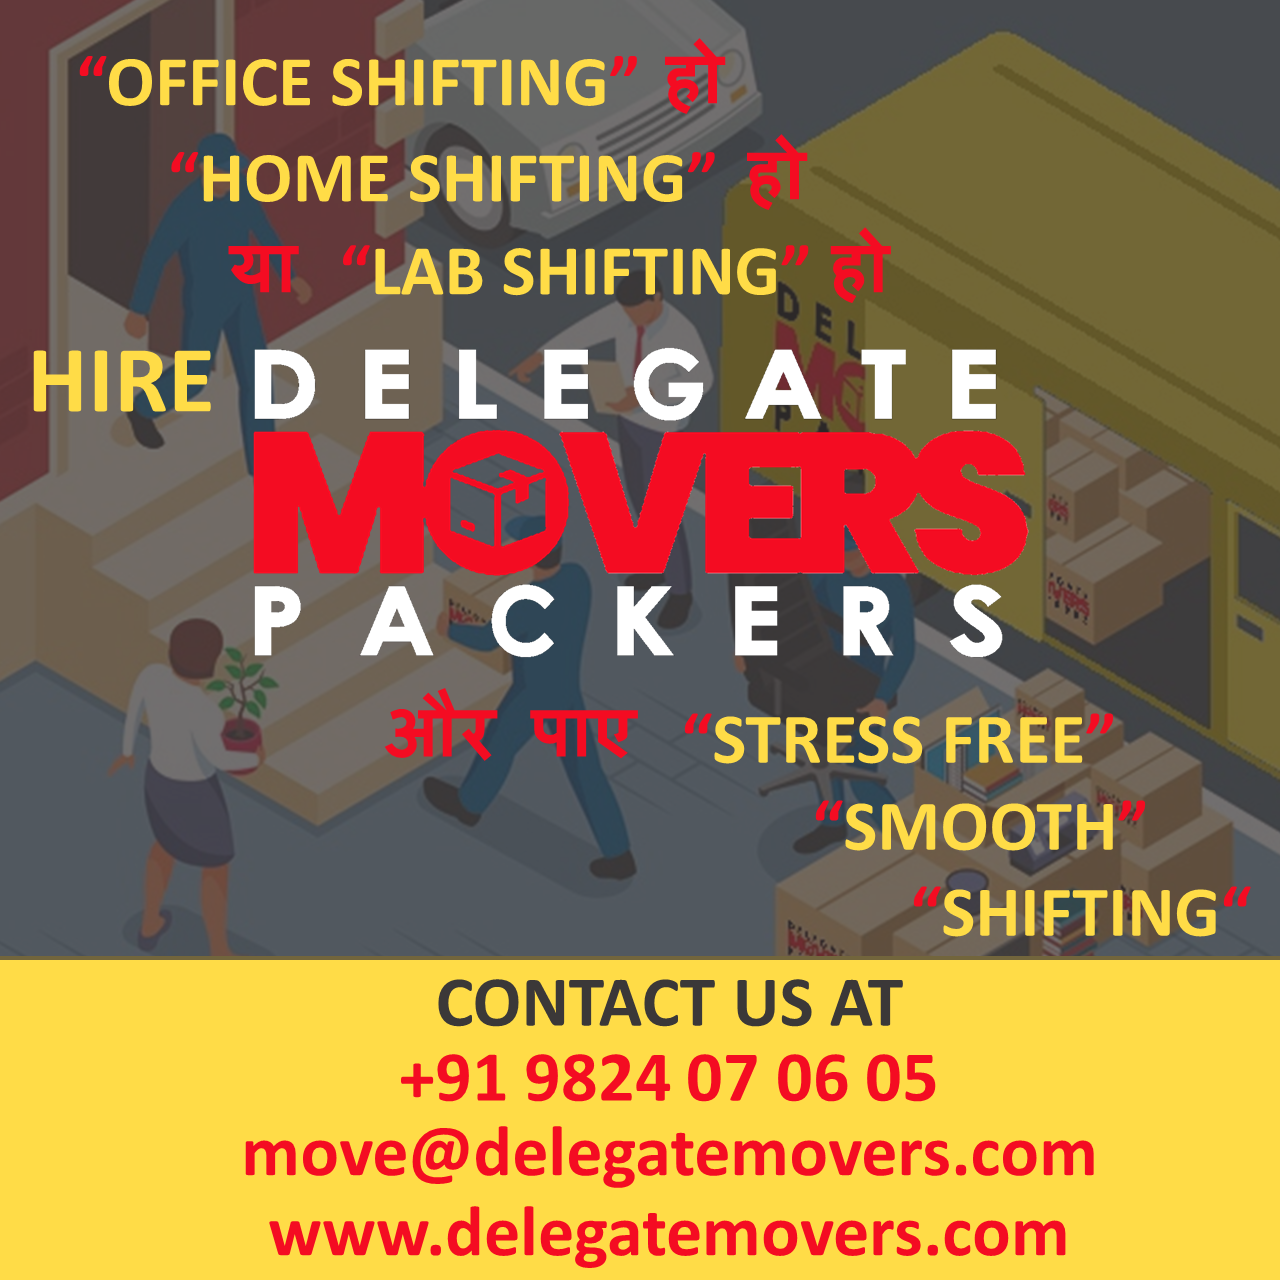 Hire Delegate Movers and Packers